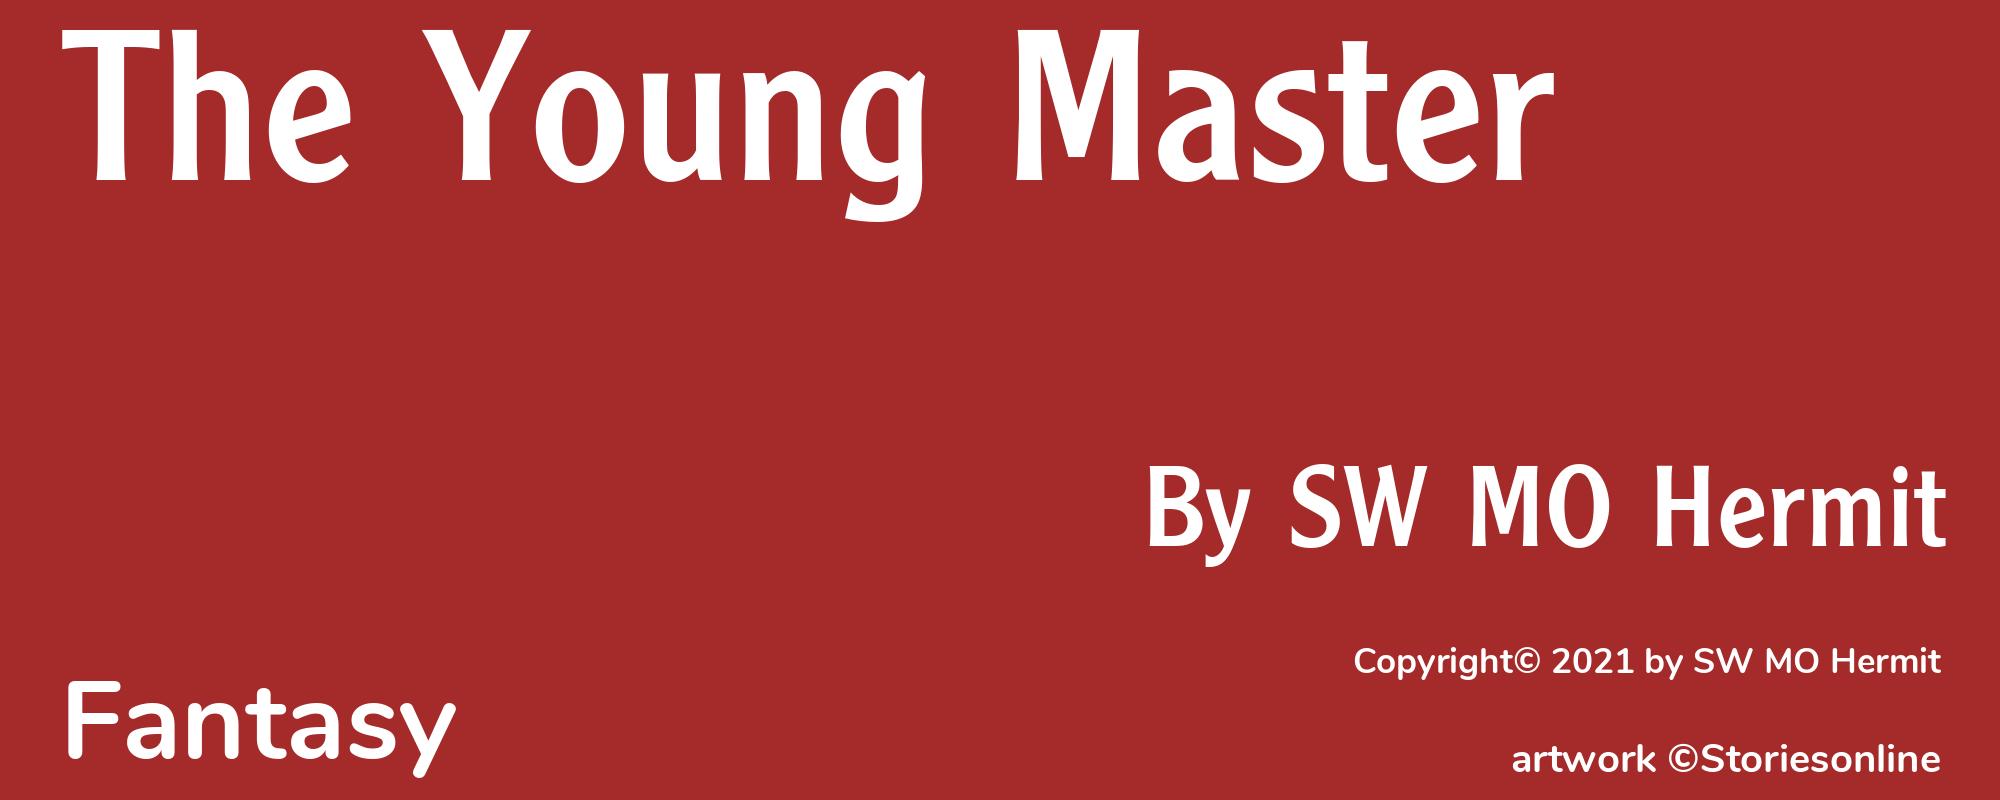 The Young Master - Cover